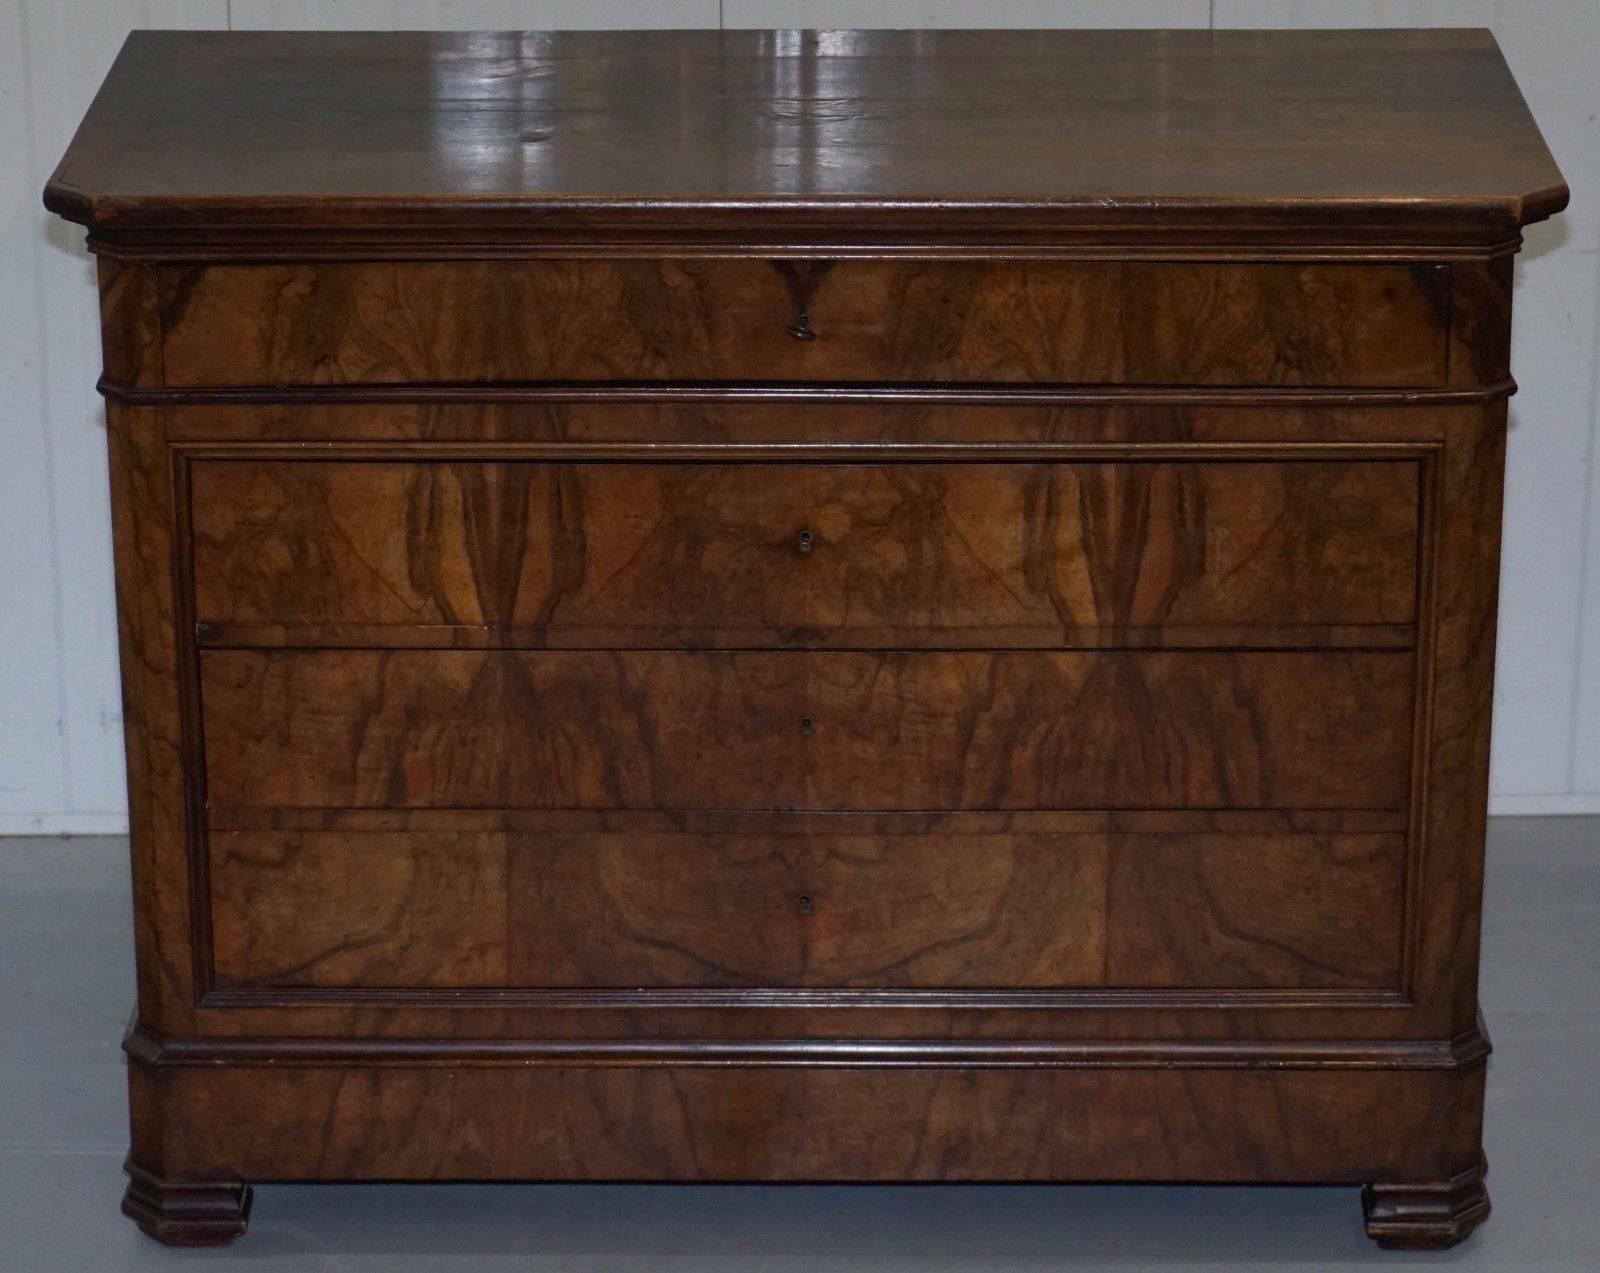 Nice antique circa 1860 solid walnut Bidermeirer chest / bank of drawers

Please note the delivery fee listed is just a guide, for an accurate quote please send me your postcode and I’ll price it up for you

Please note the delivery fee listed is